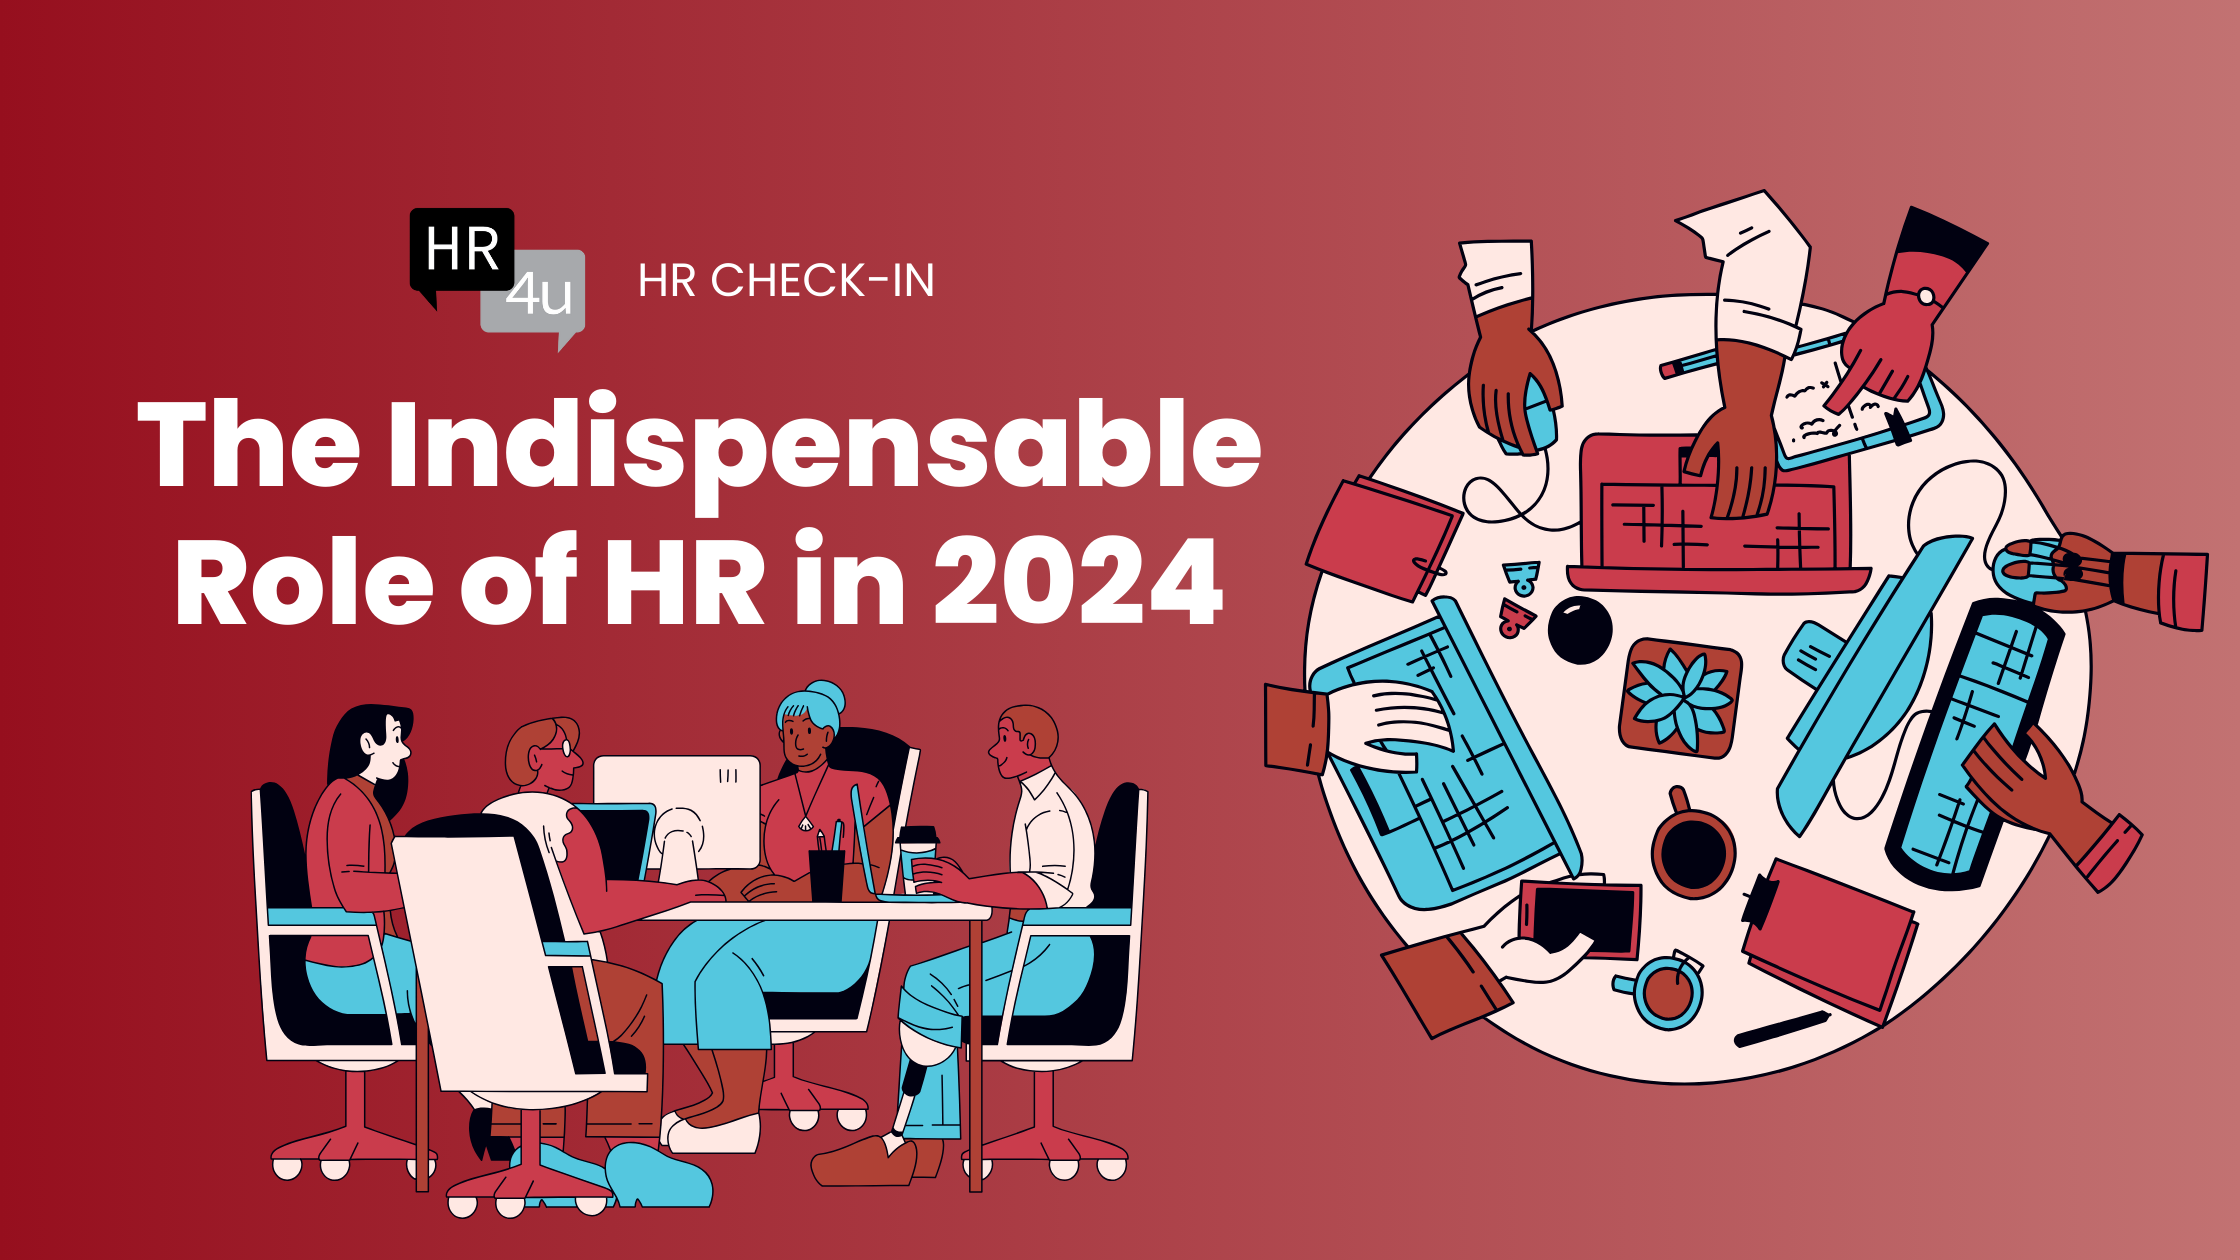 The Indispensable Role of HR in 2024